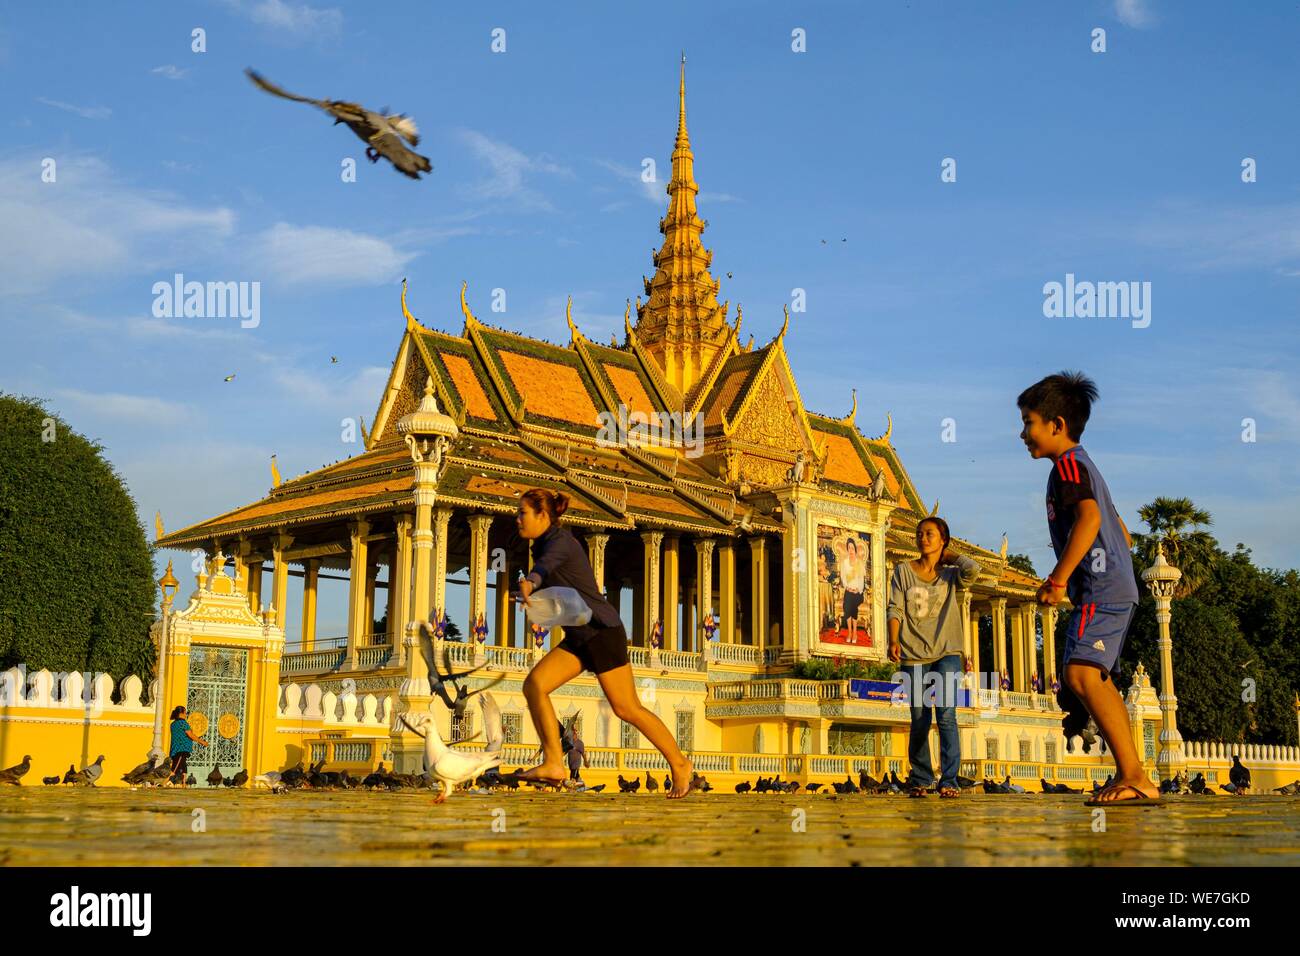 Cambodia, Phnom Penh, the Royal Palace, residence of the King of Cambodia, built in 1860, children playing with the pigeons Stock Photo